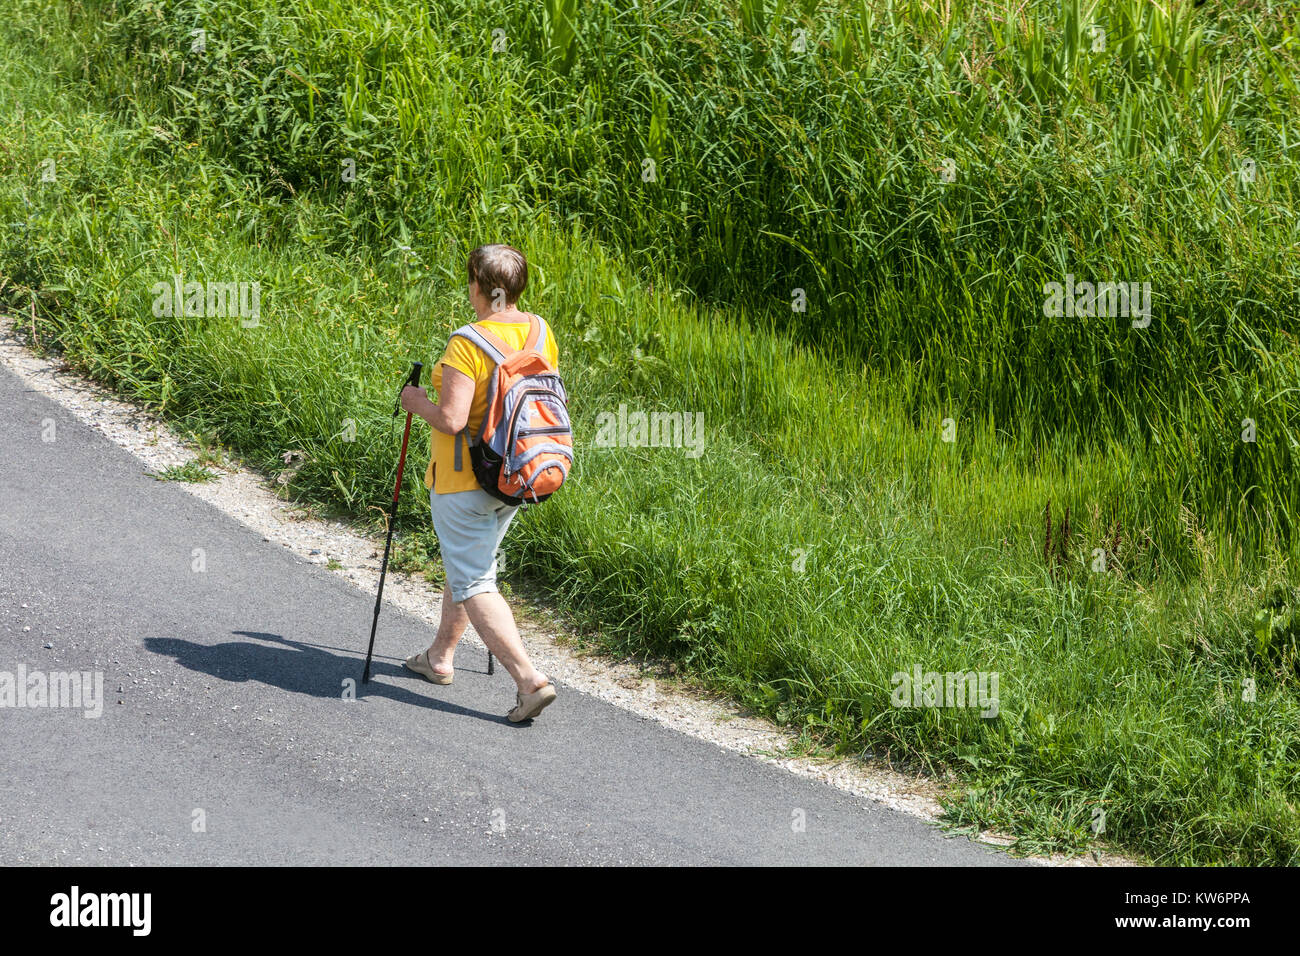 Elderly woman Nordic walking on a country road, active ageing population senior healthy lifestyle older person Stock Photo